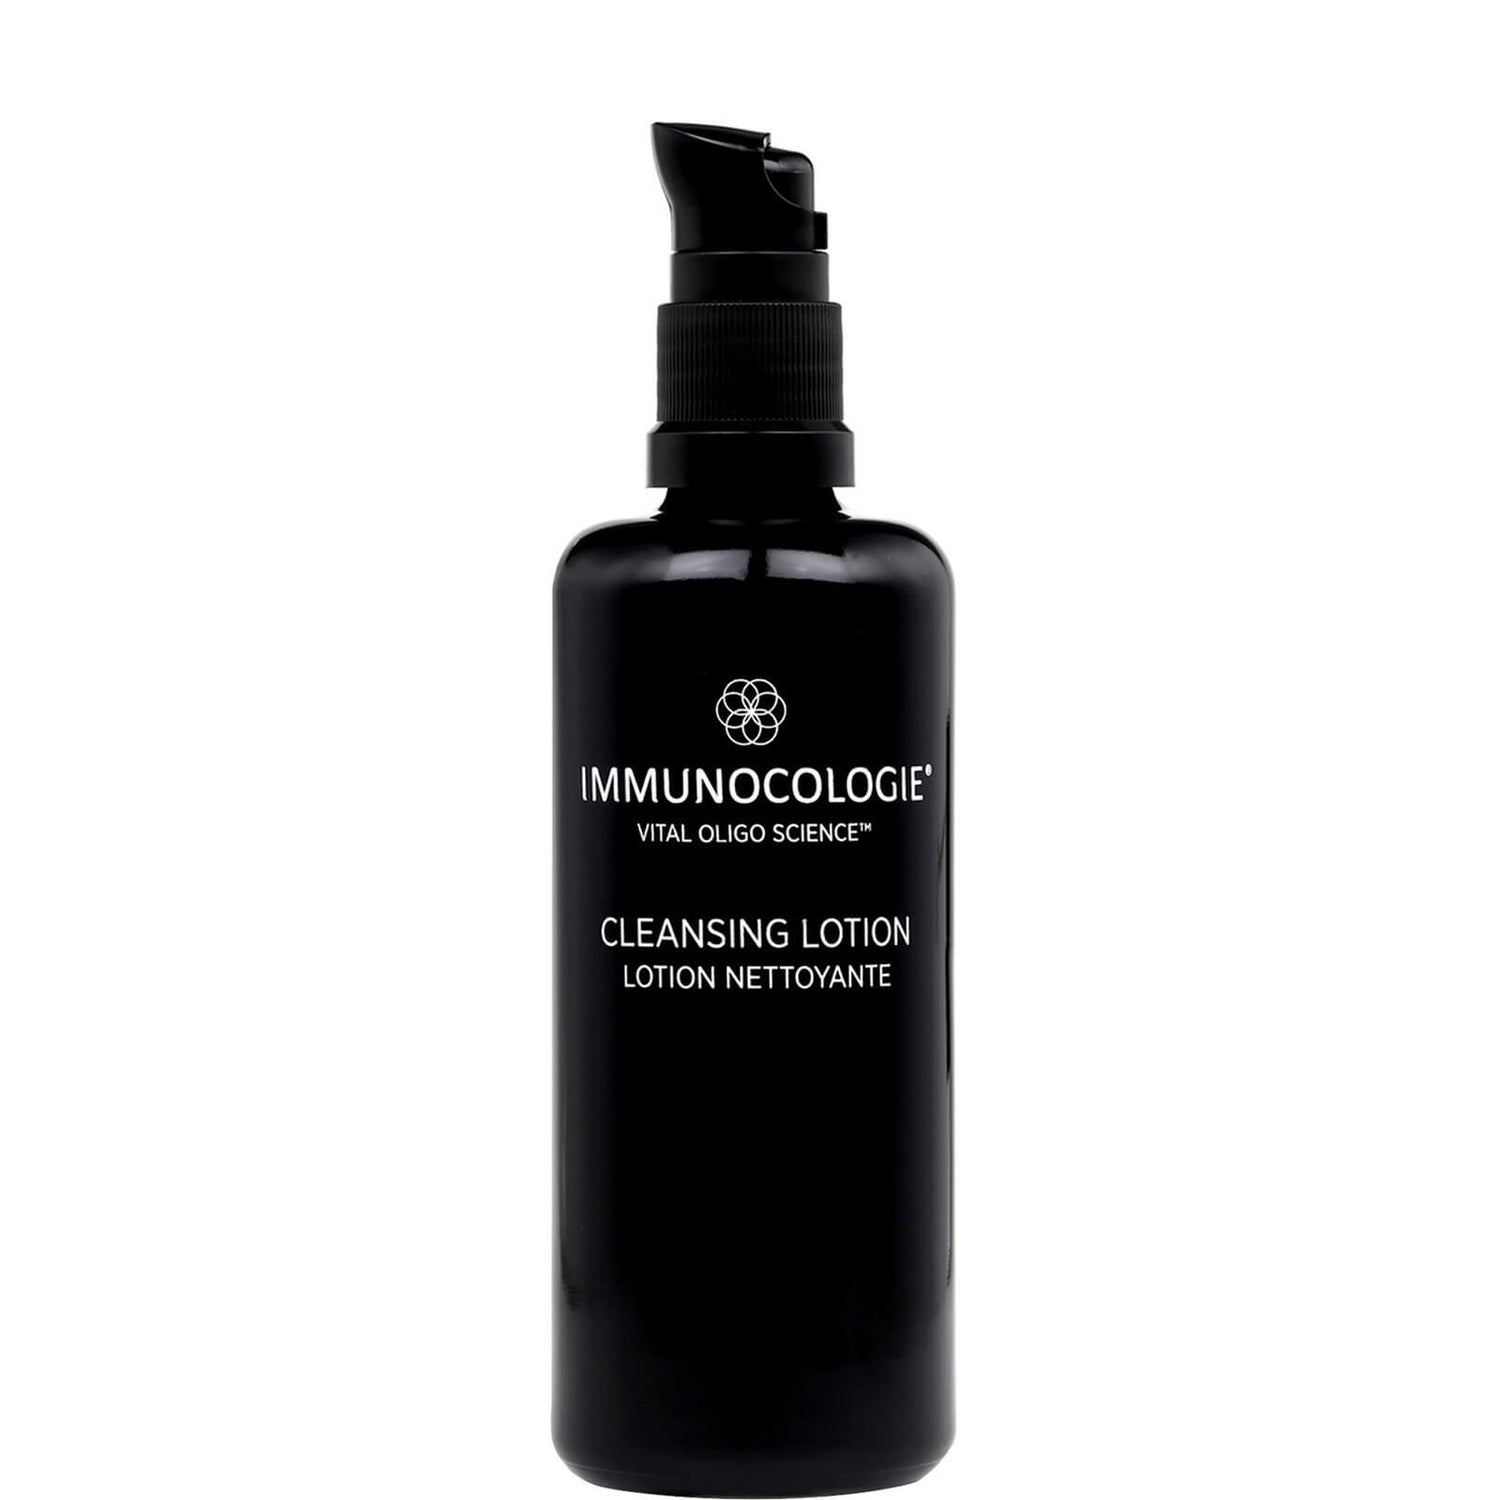 Immunocologie Cleansing Lotion 100ml